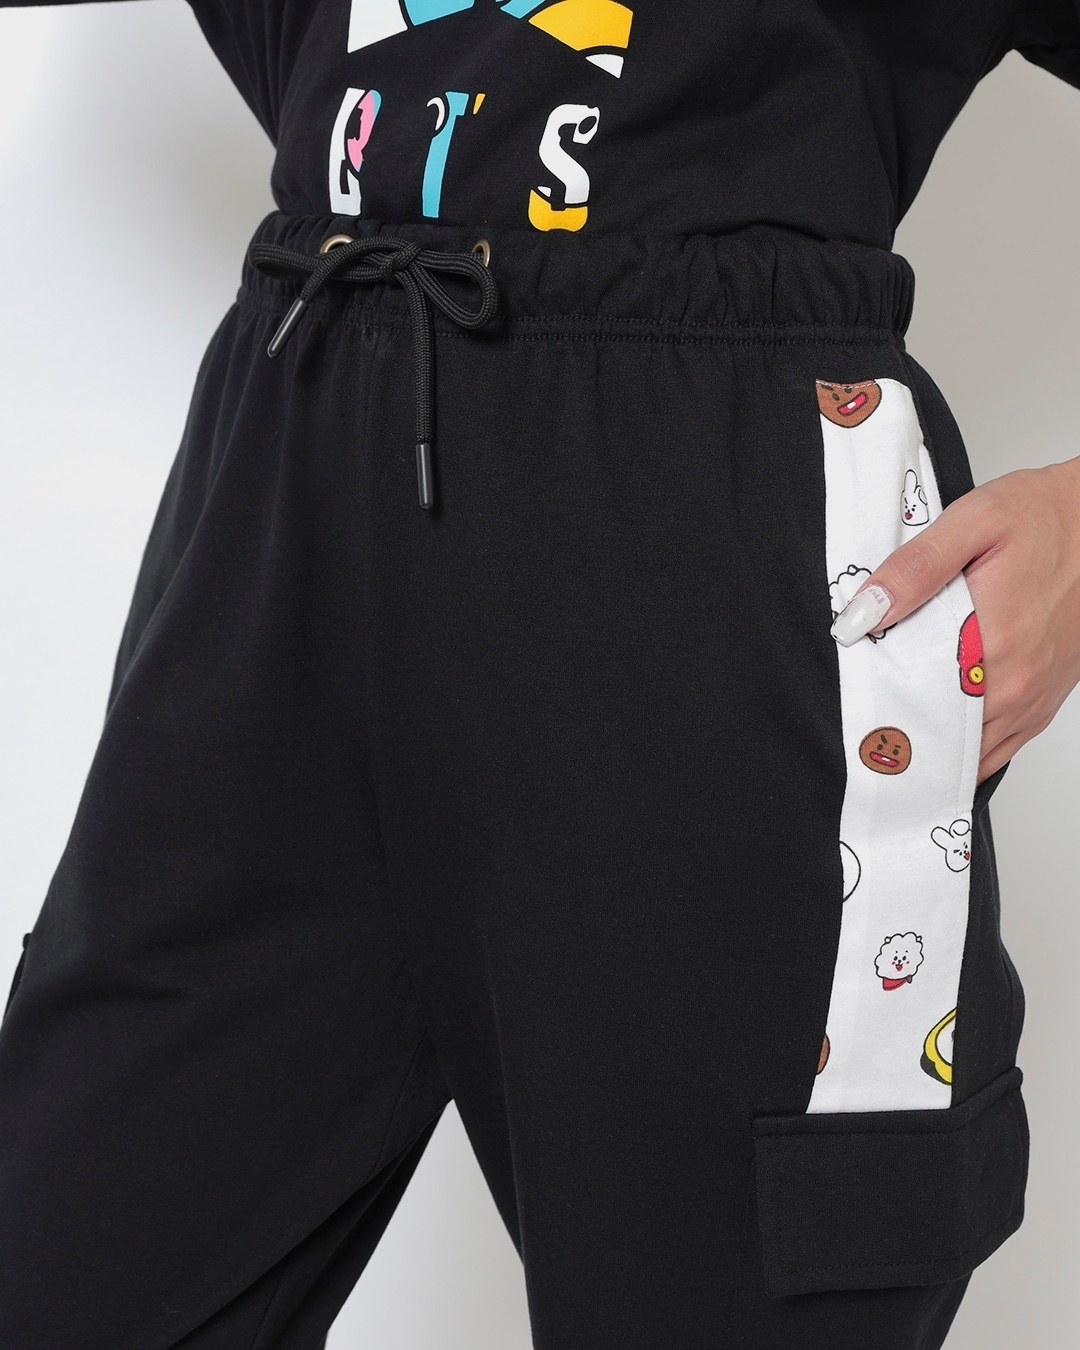 Shop Women's Black BTS Doodle Graphic Printed Relaxed Fit Joggers